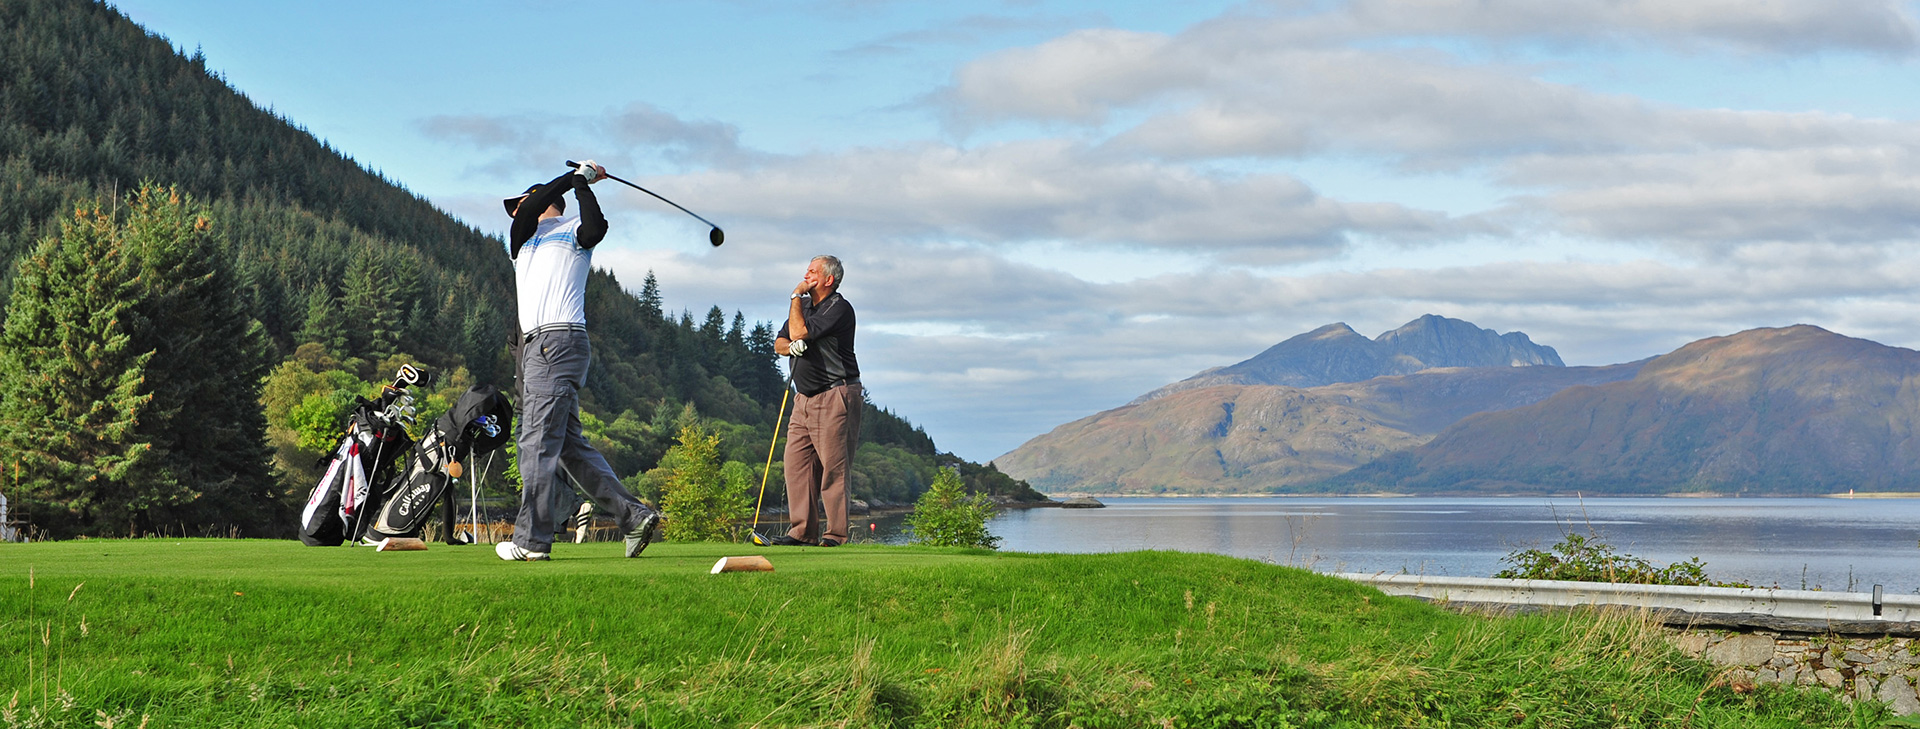 Guests at Birchbrae Highland Lodges enjoy free golf at the Dragon's Tooth Golf Course